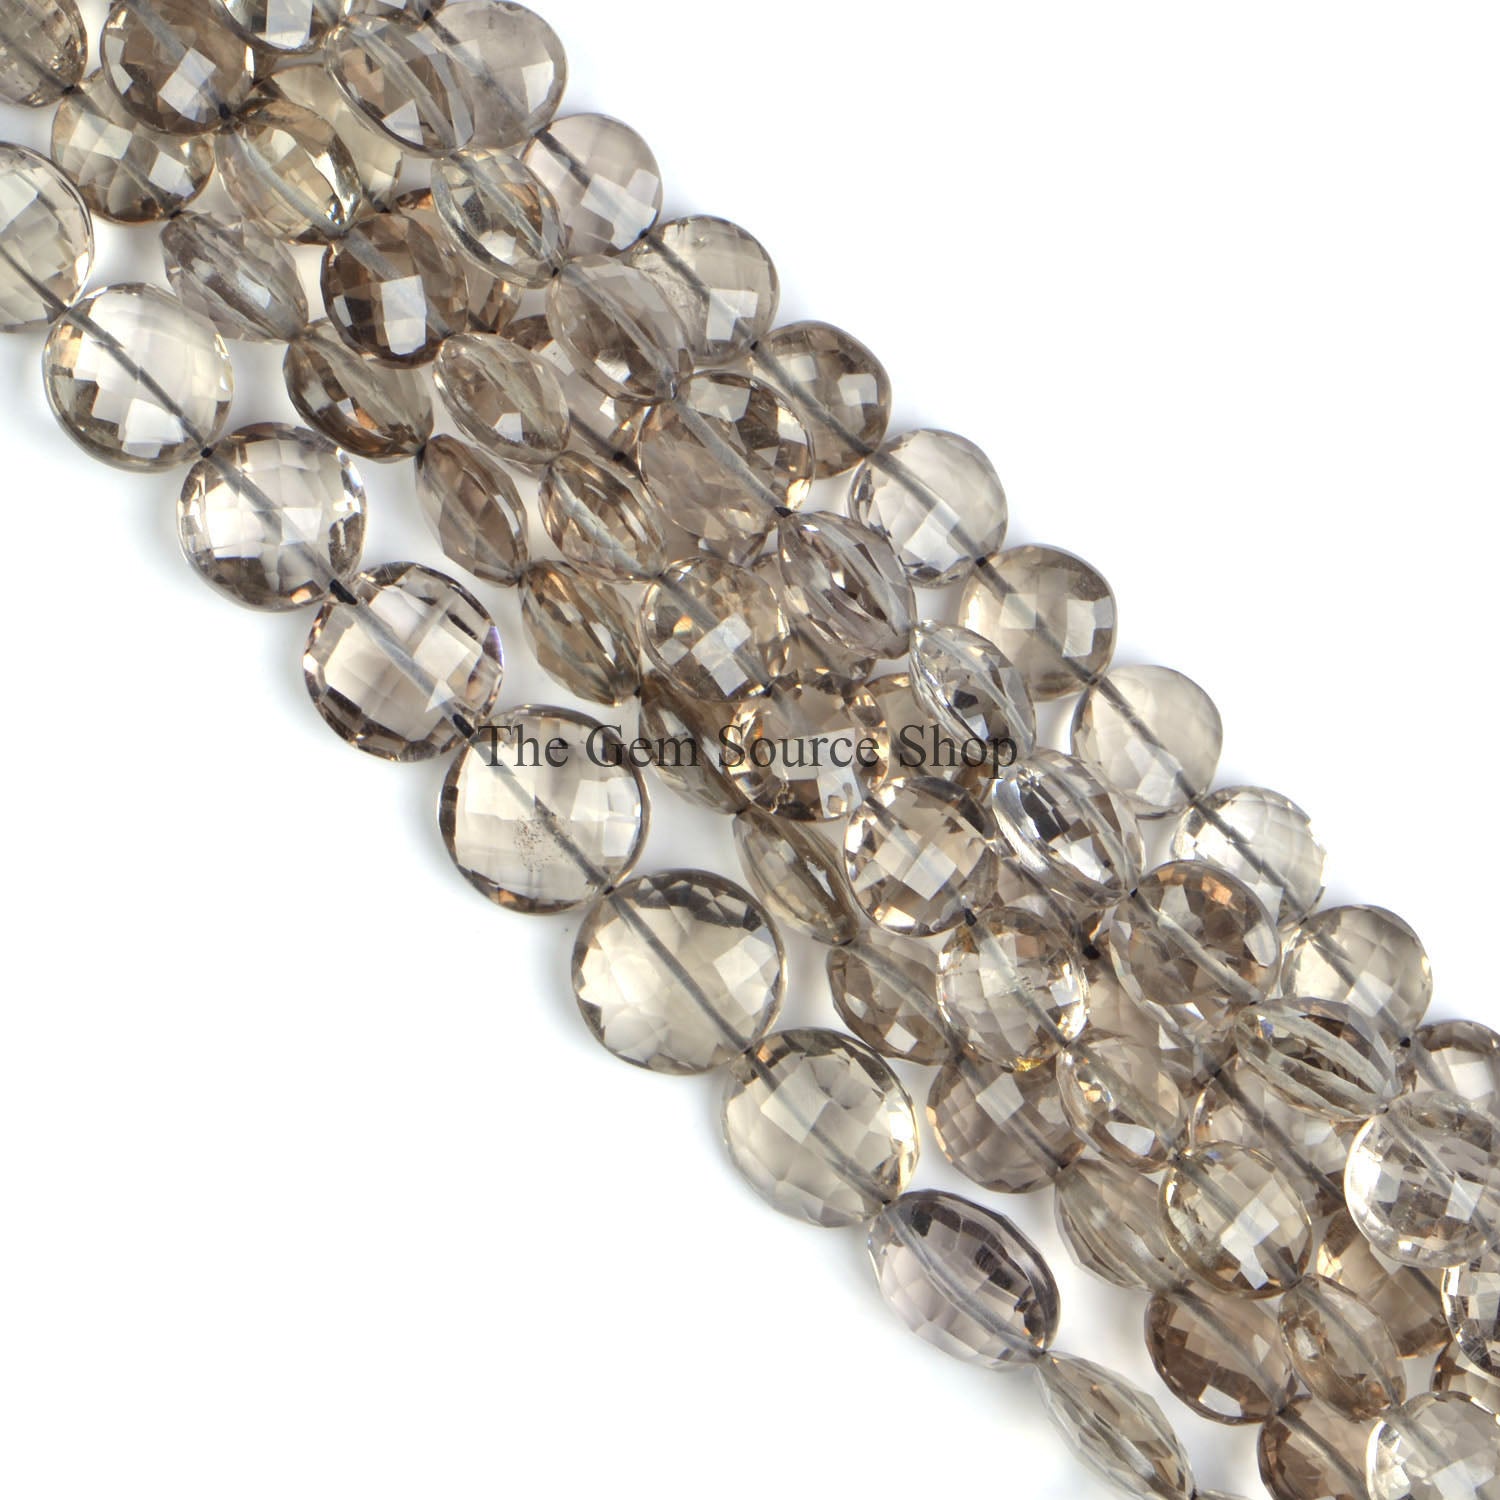 Smoky Quartz Beads, Faceted Coin Shape Beads, Smoky Quartz Gemstone Beads, Wholesale Beads